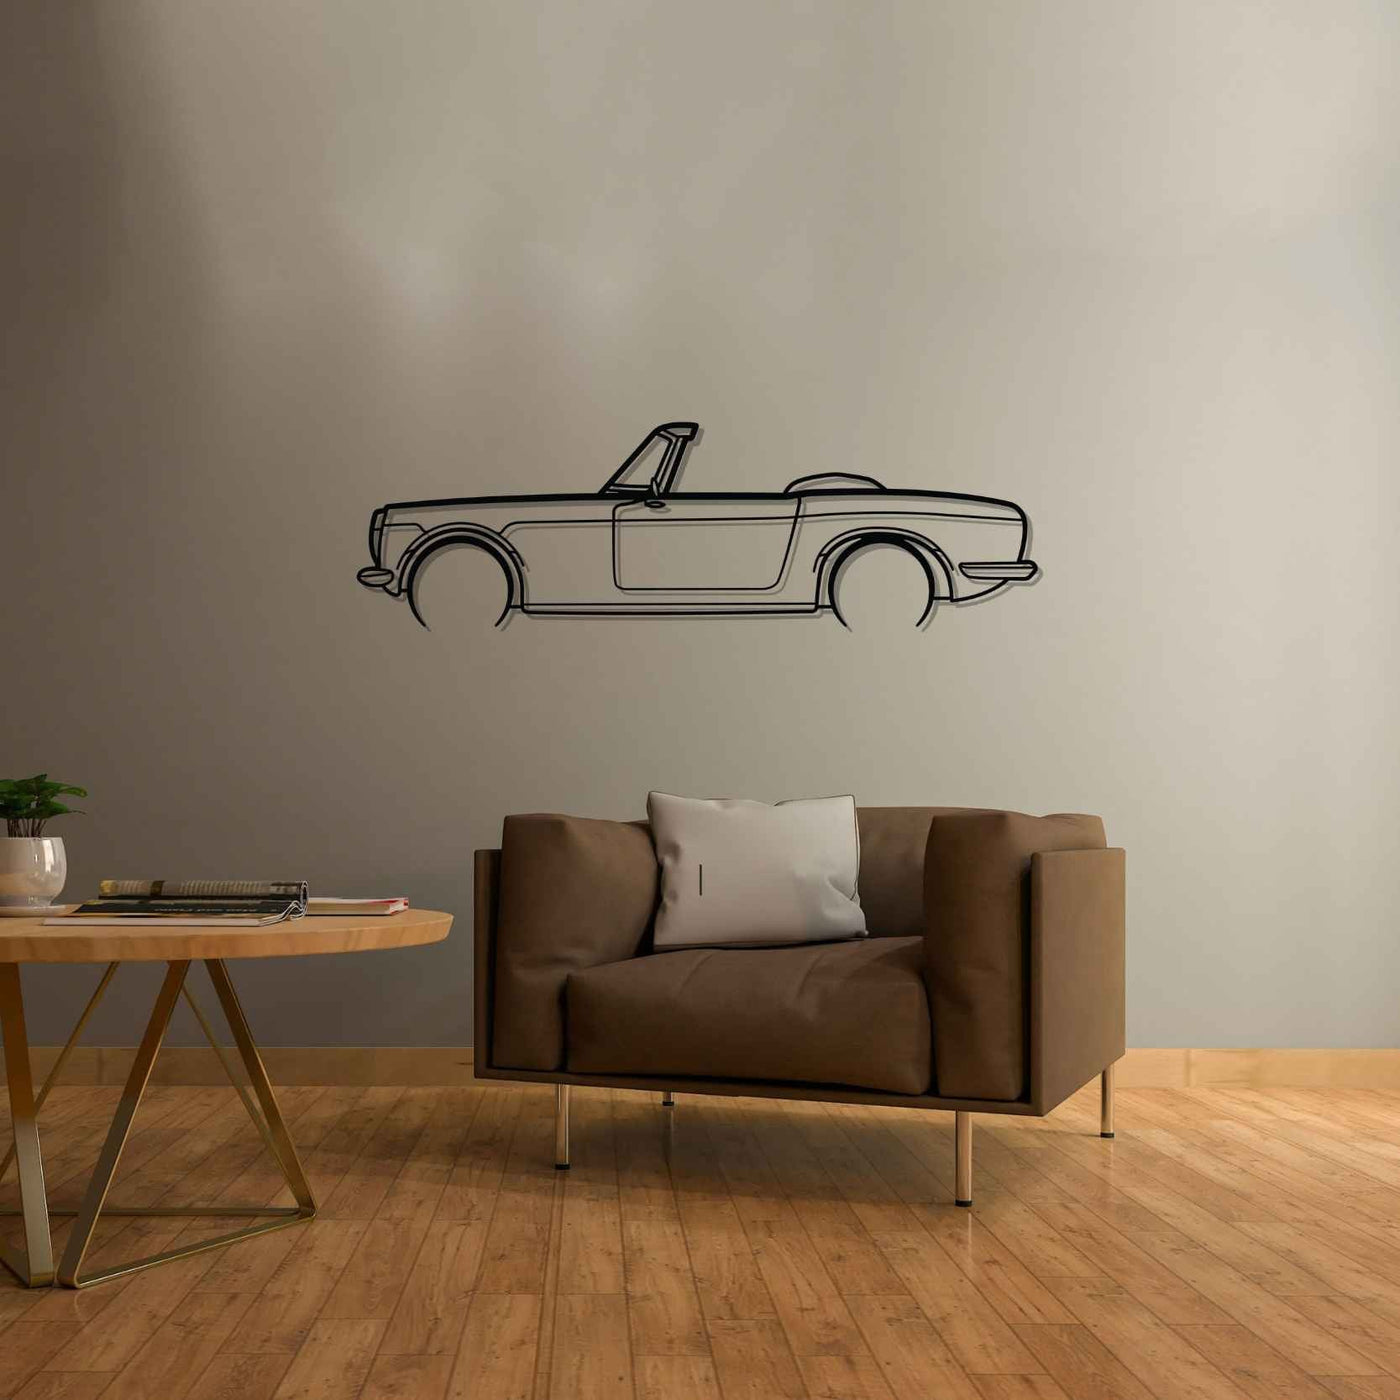 S600 1965 Detailed Silhouette Metal Wall Art